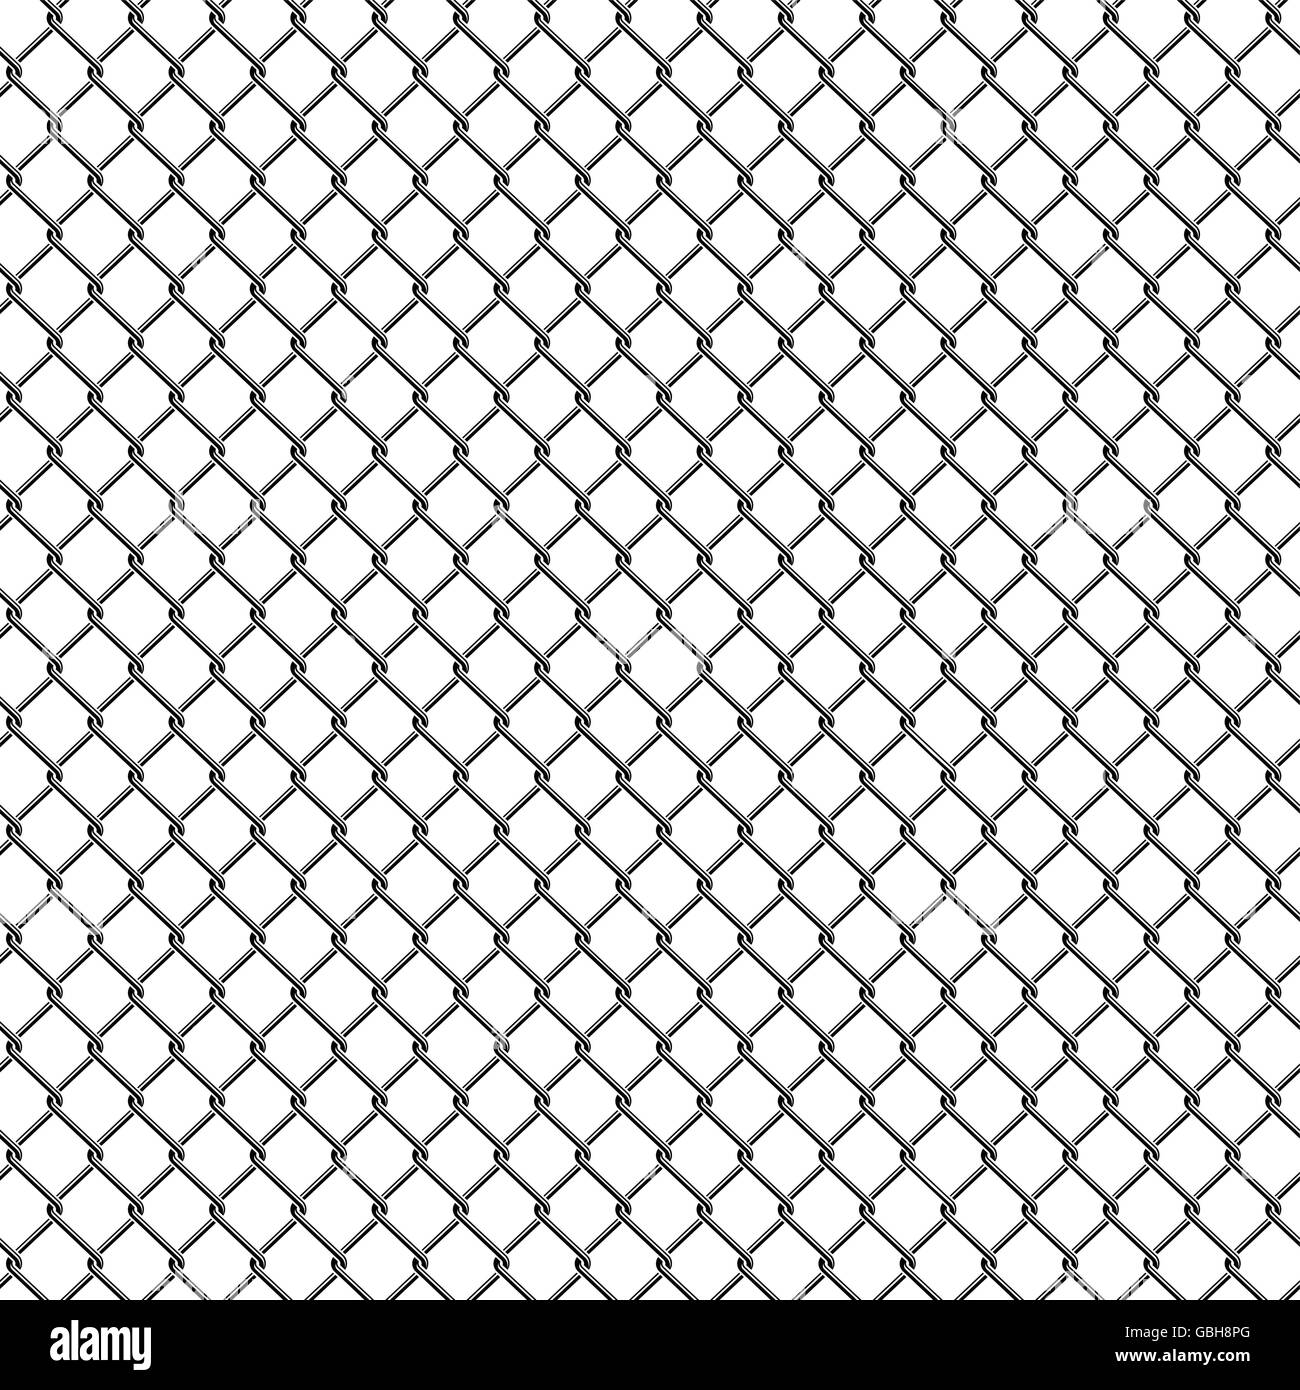 Seamless chain link fence pattern texture wallpaper Stock Vector Image ...